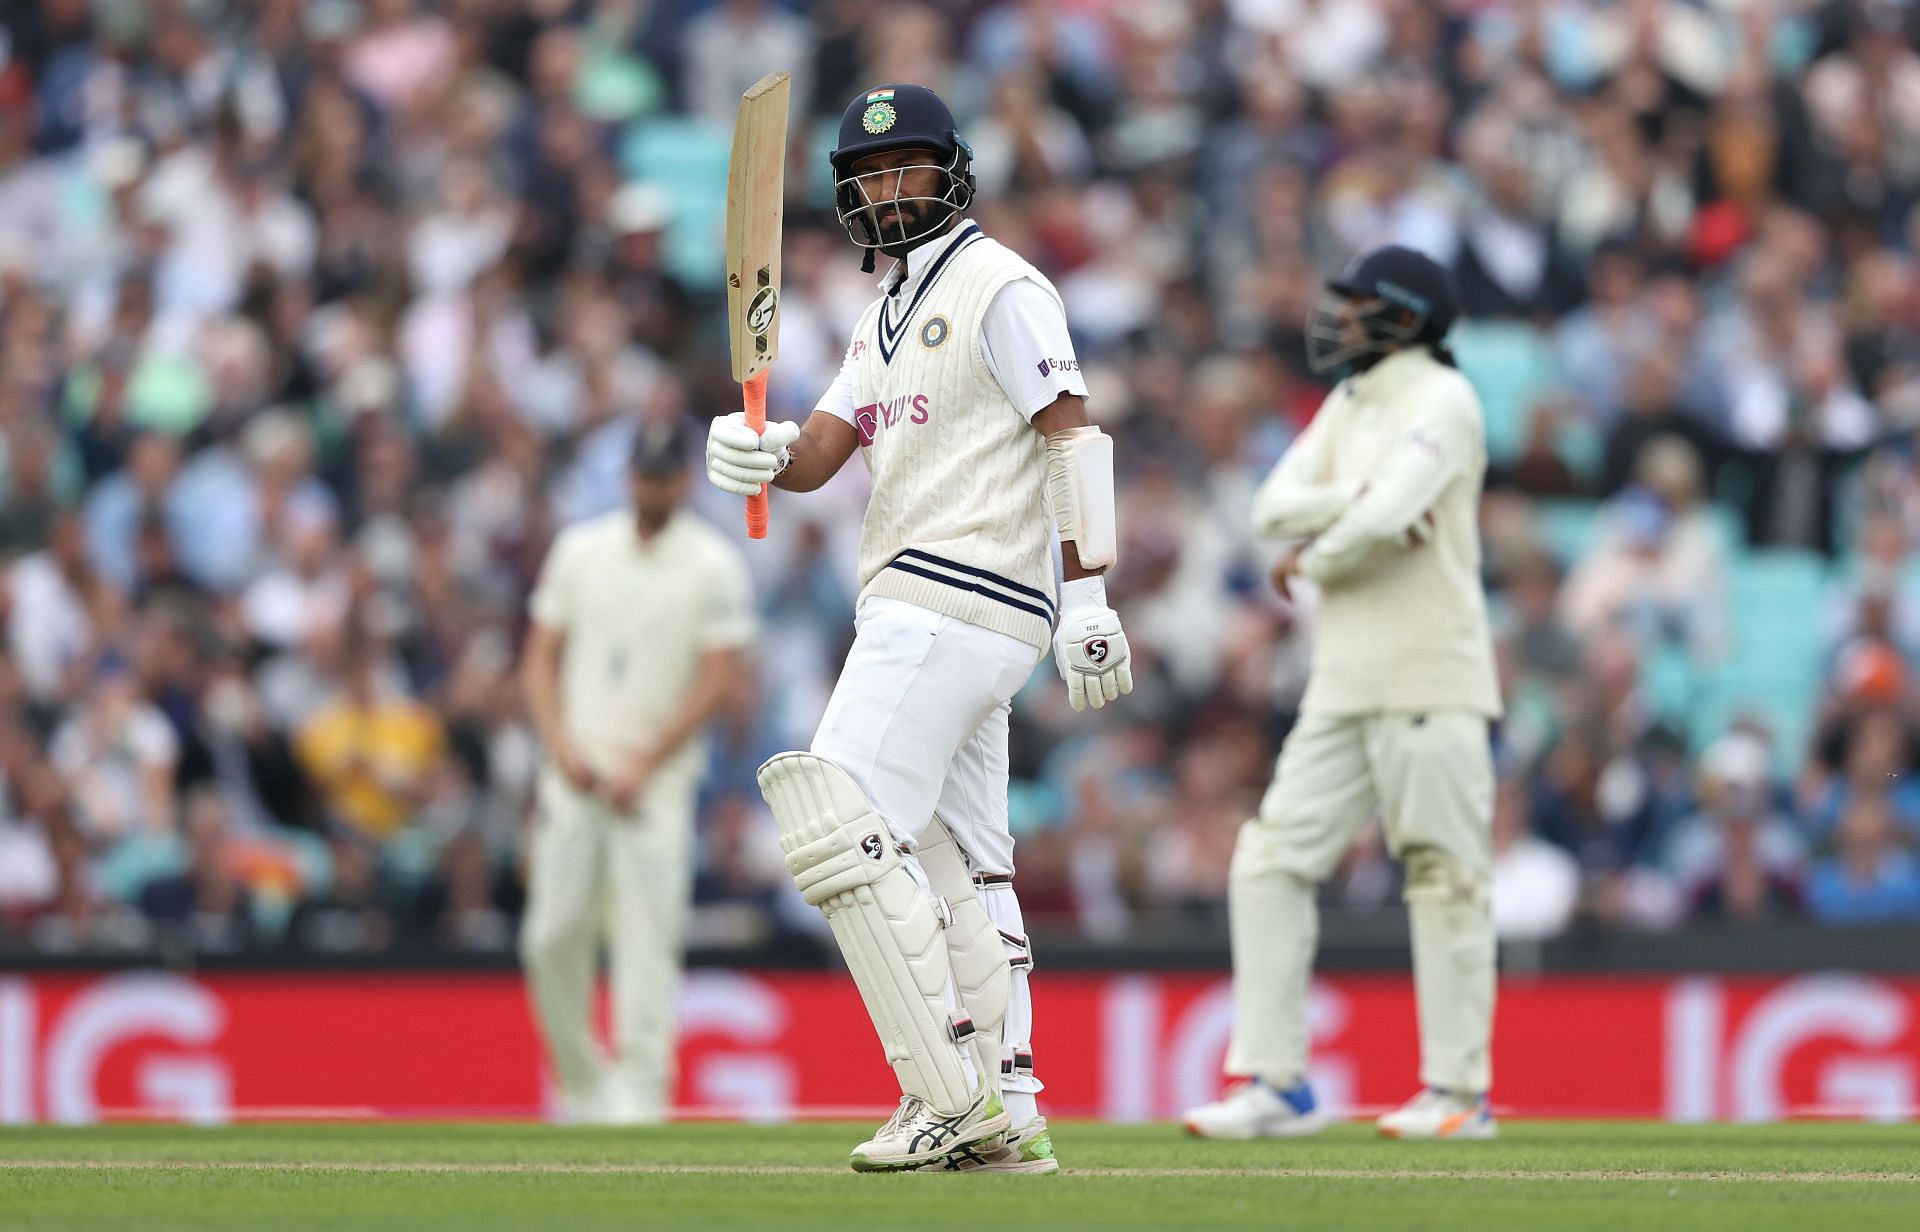 Pujara has registered a double ton against England. Pic: Getty Images